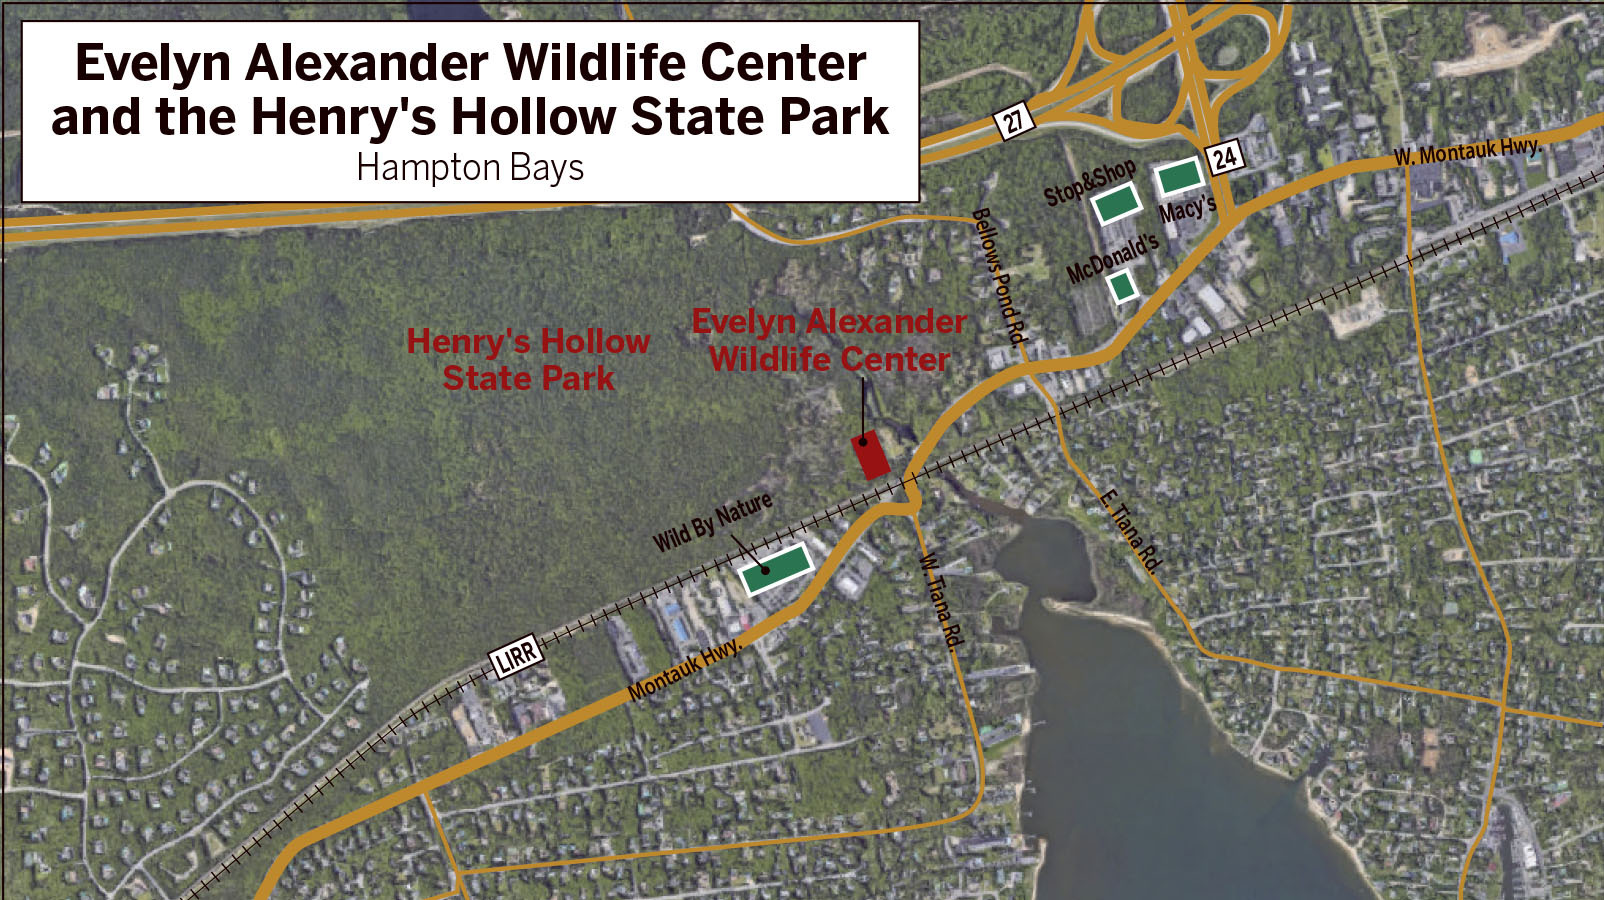 Hunting is permitted on the state property that abuts the wildlife rescue center.